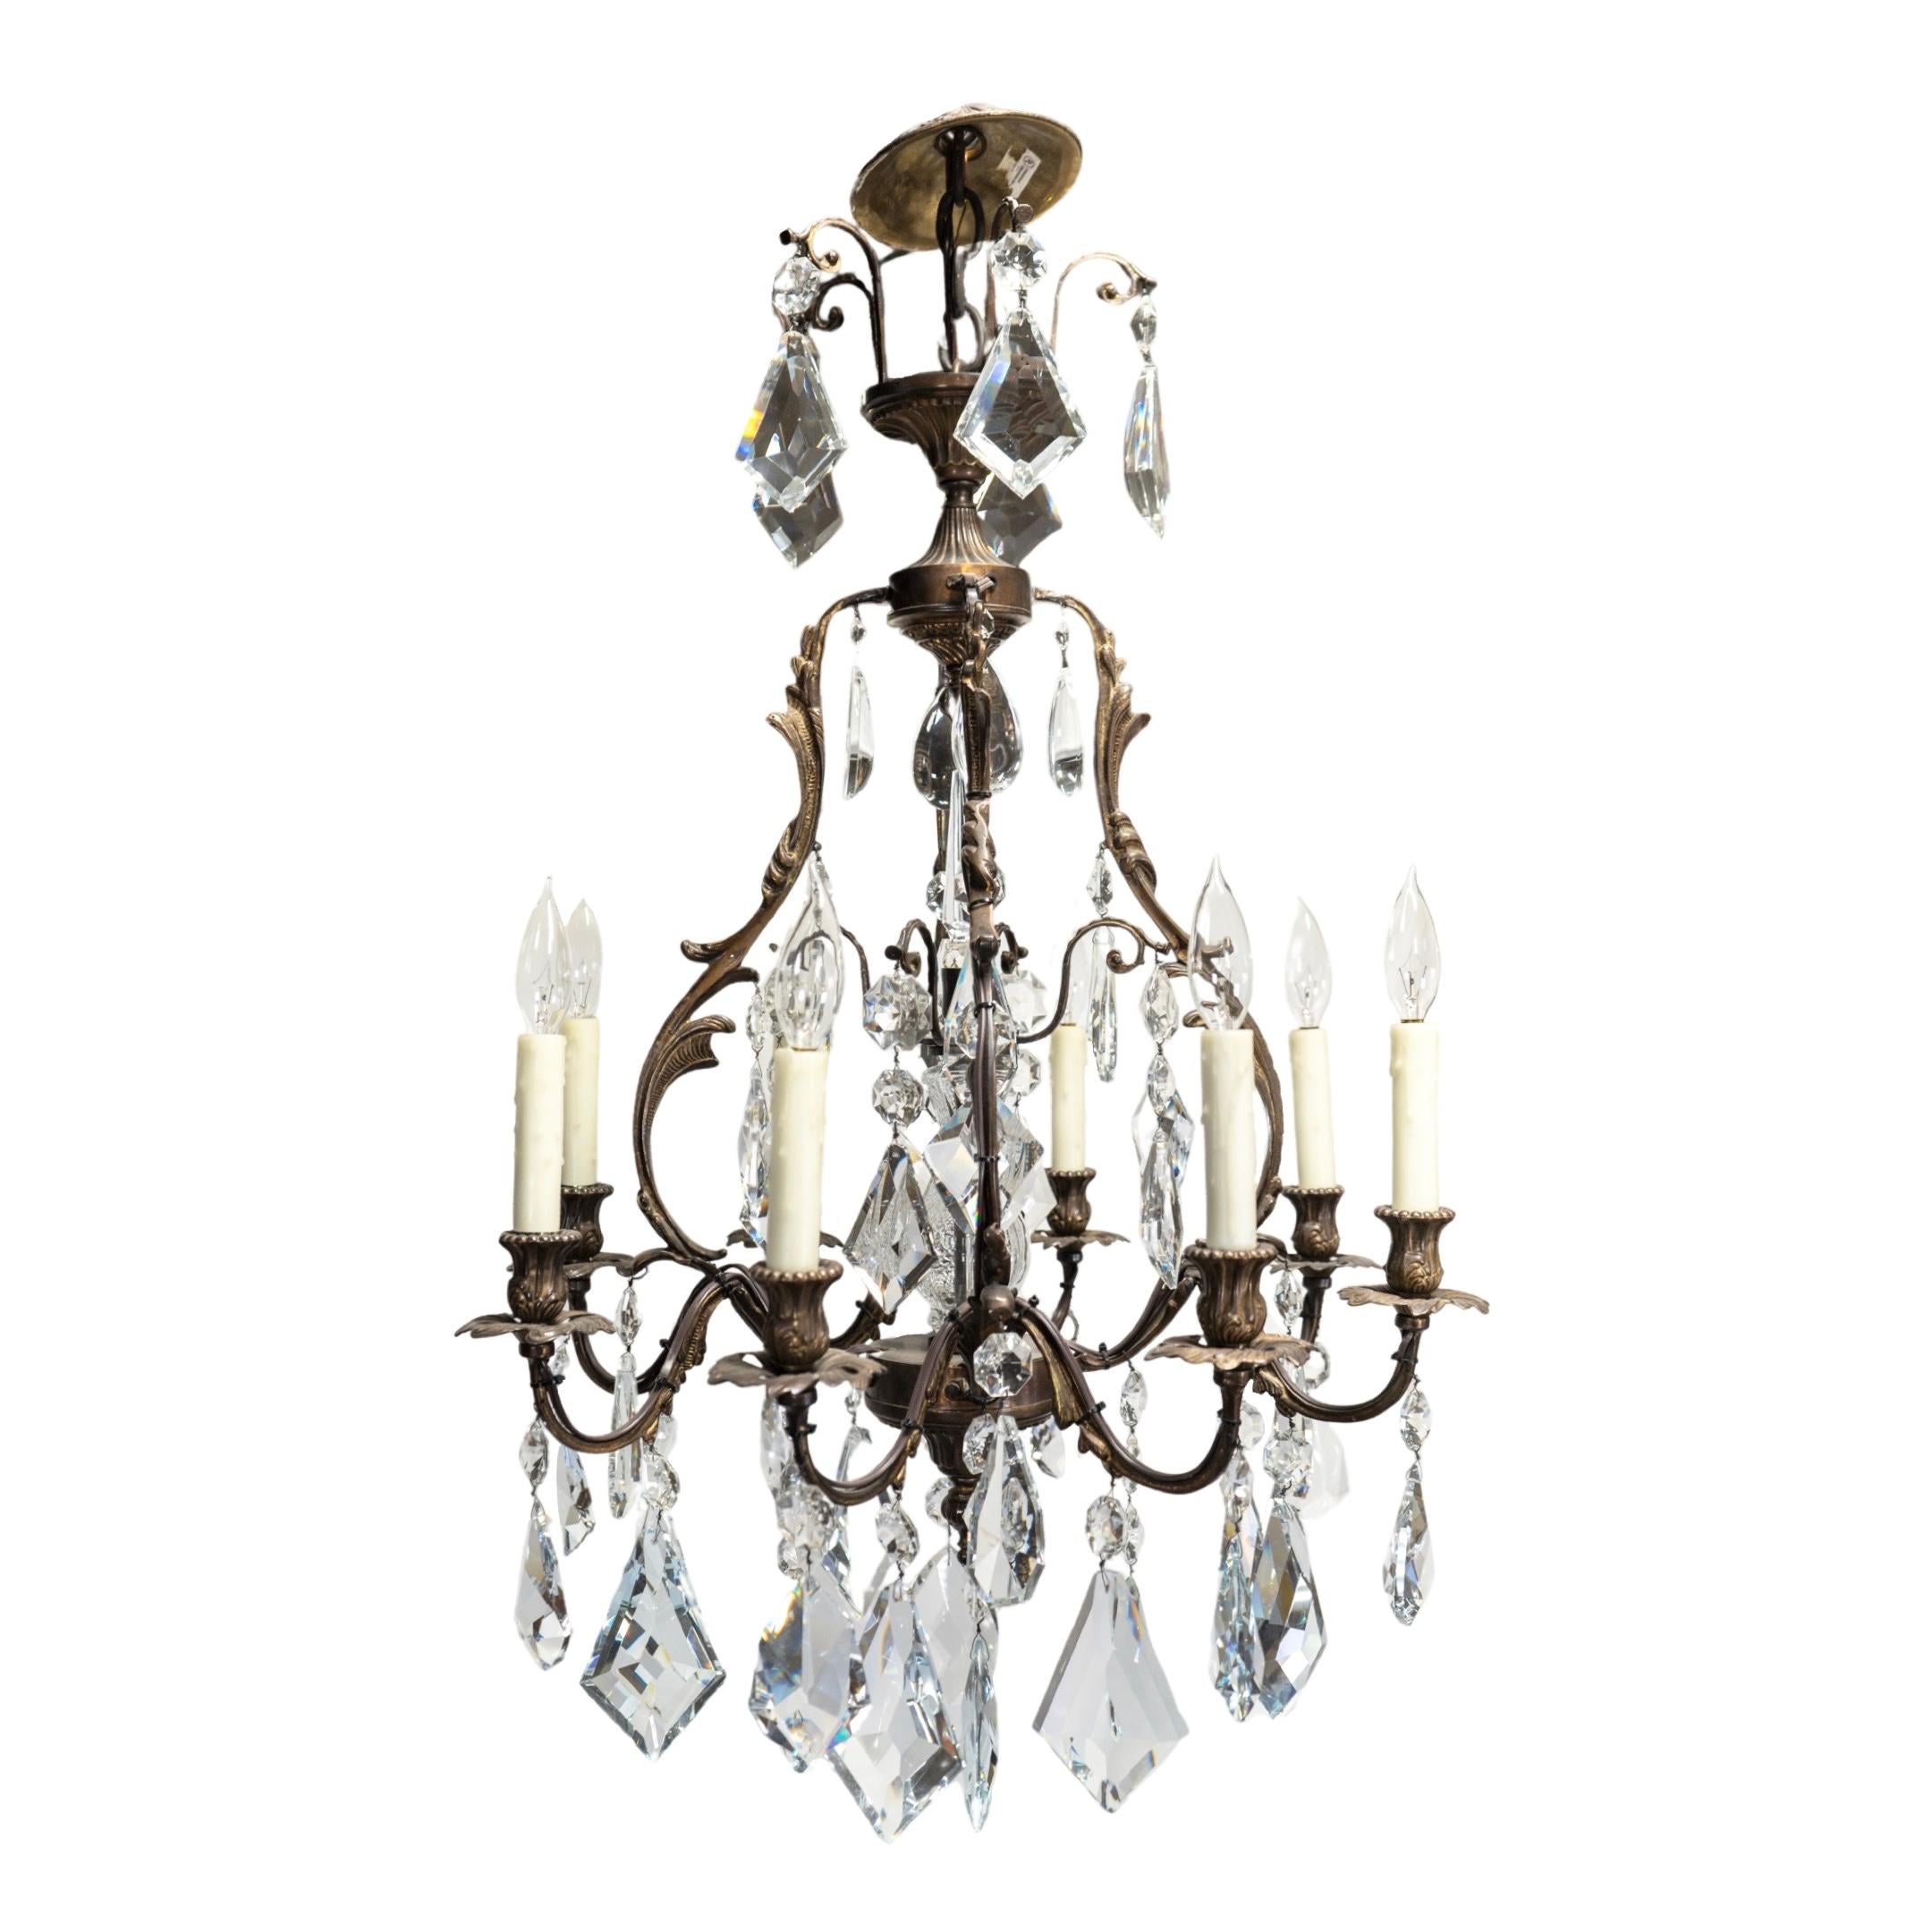 This French Bronze and Crystal Chandelier, crafted in 1990s France, offers a touch of elegance and sophistication to any space. With its intricate bronze and crystal design, this chandelier provides both functional lighting and a beautiful statement